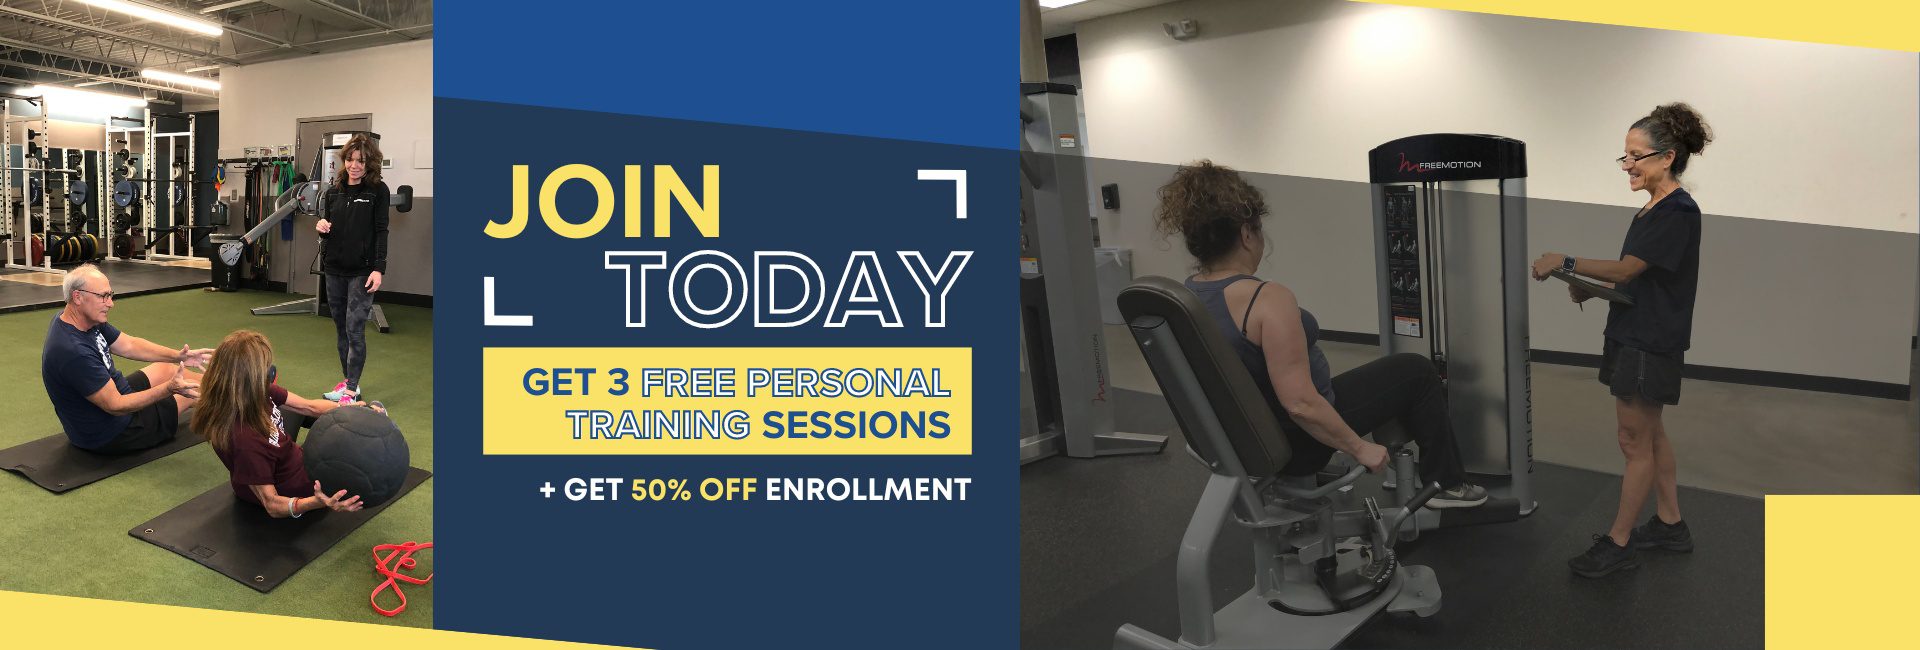 offer join for 50% off enrollment and 3 free personal training sessions